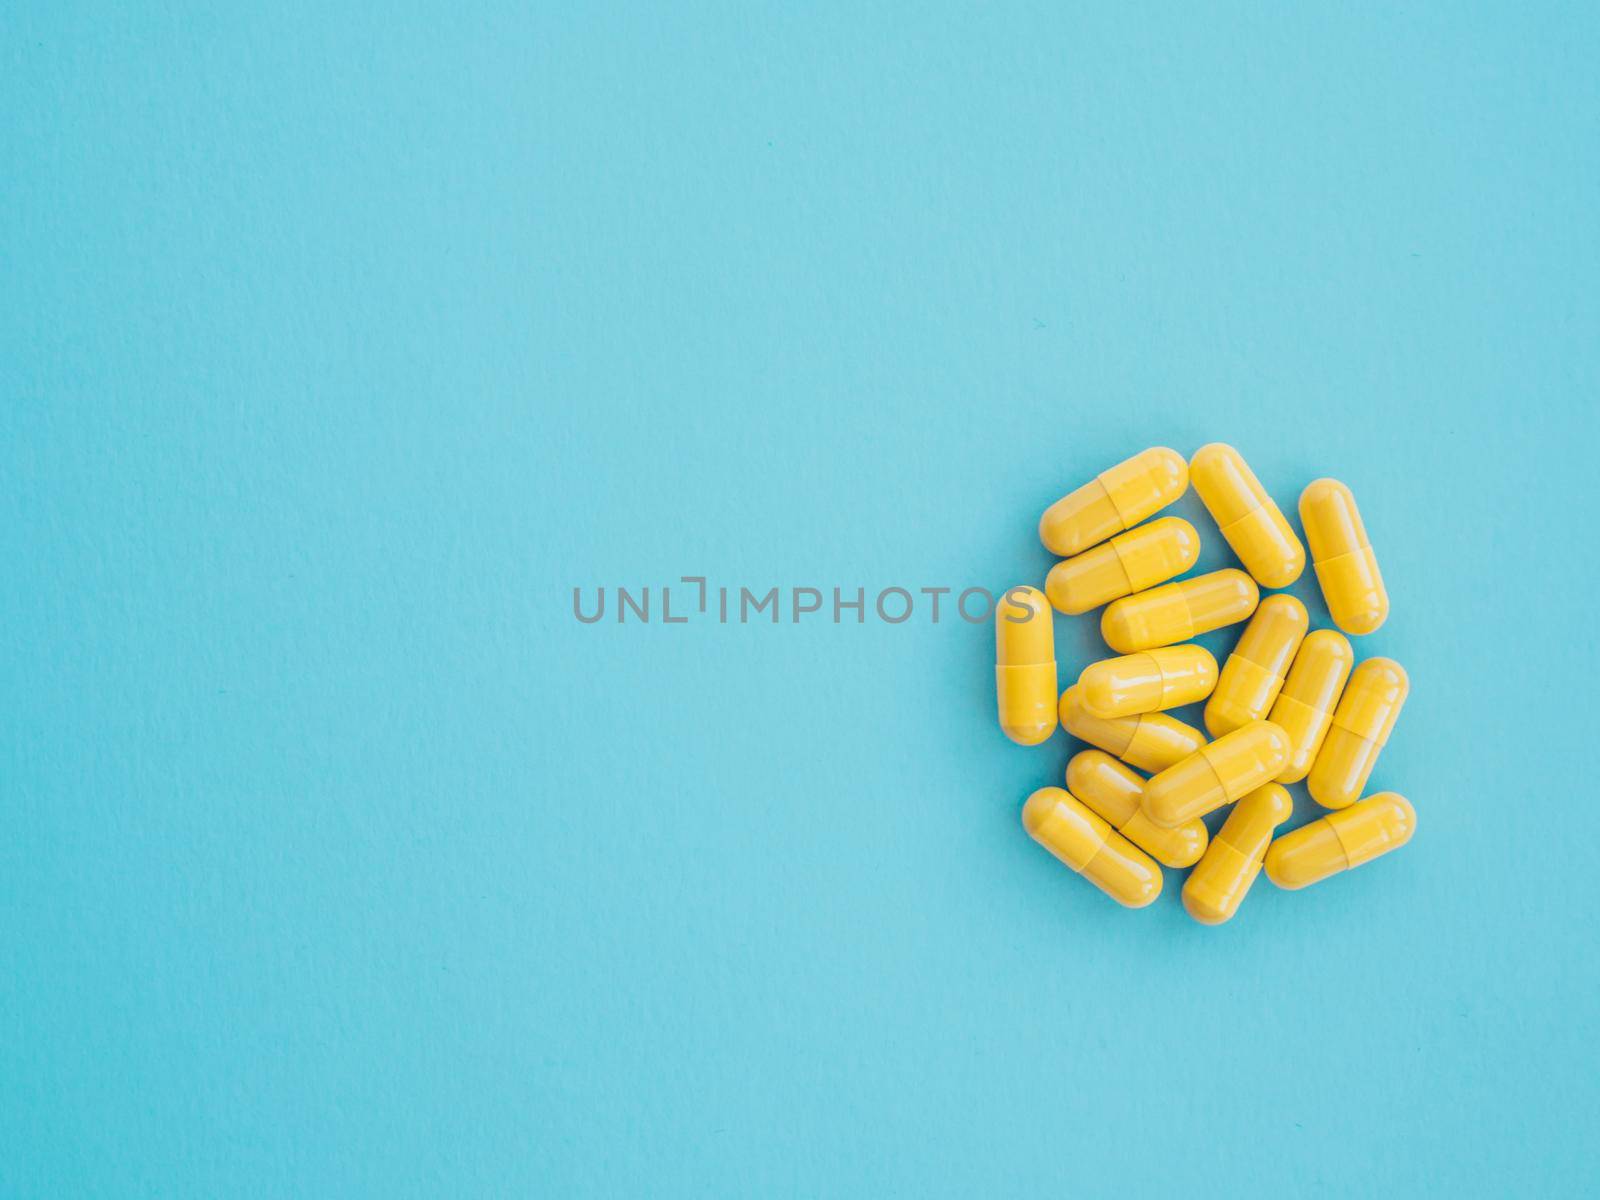 Concept of healthcare and medicine. treatment of viruses. Assortment of yellow medicinal pharmaceutical products, tablets, pills, capsules on blue background. Space for text.